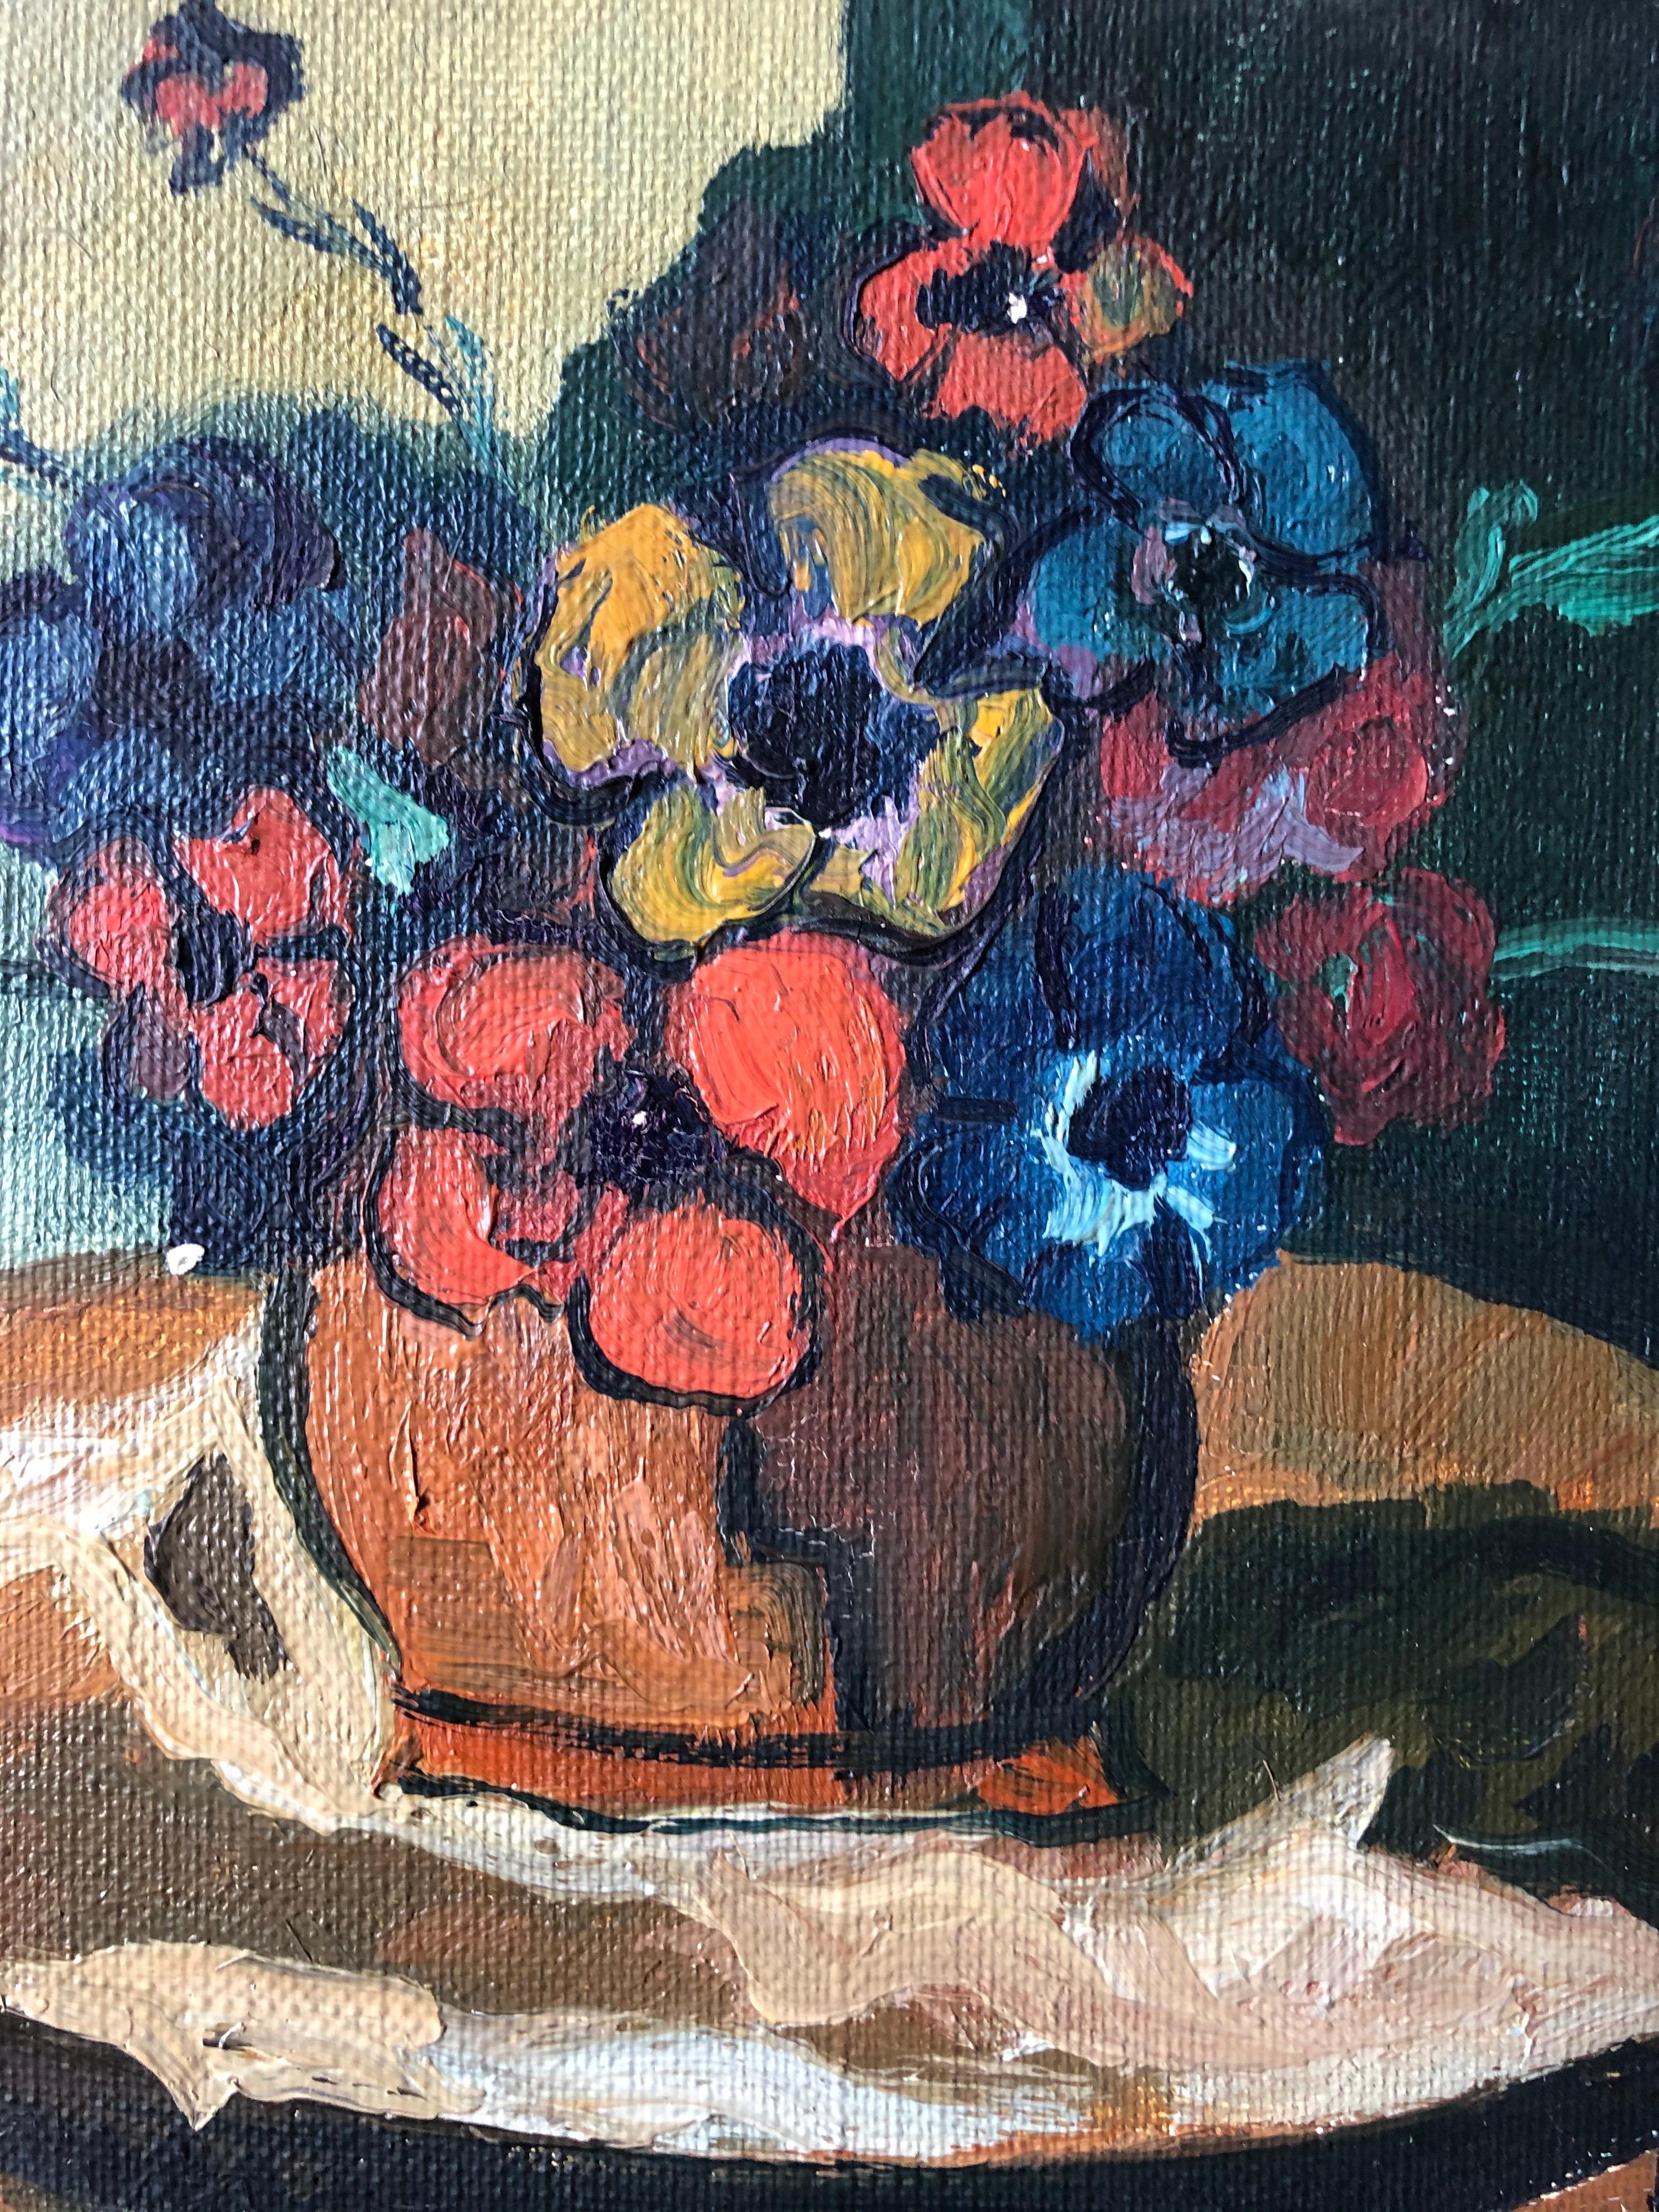 Mid 20th Century French Impasto Oil Painting on Canvas Still Life of Flowers - Black Still-Life Painting by Fernand Audet